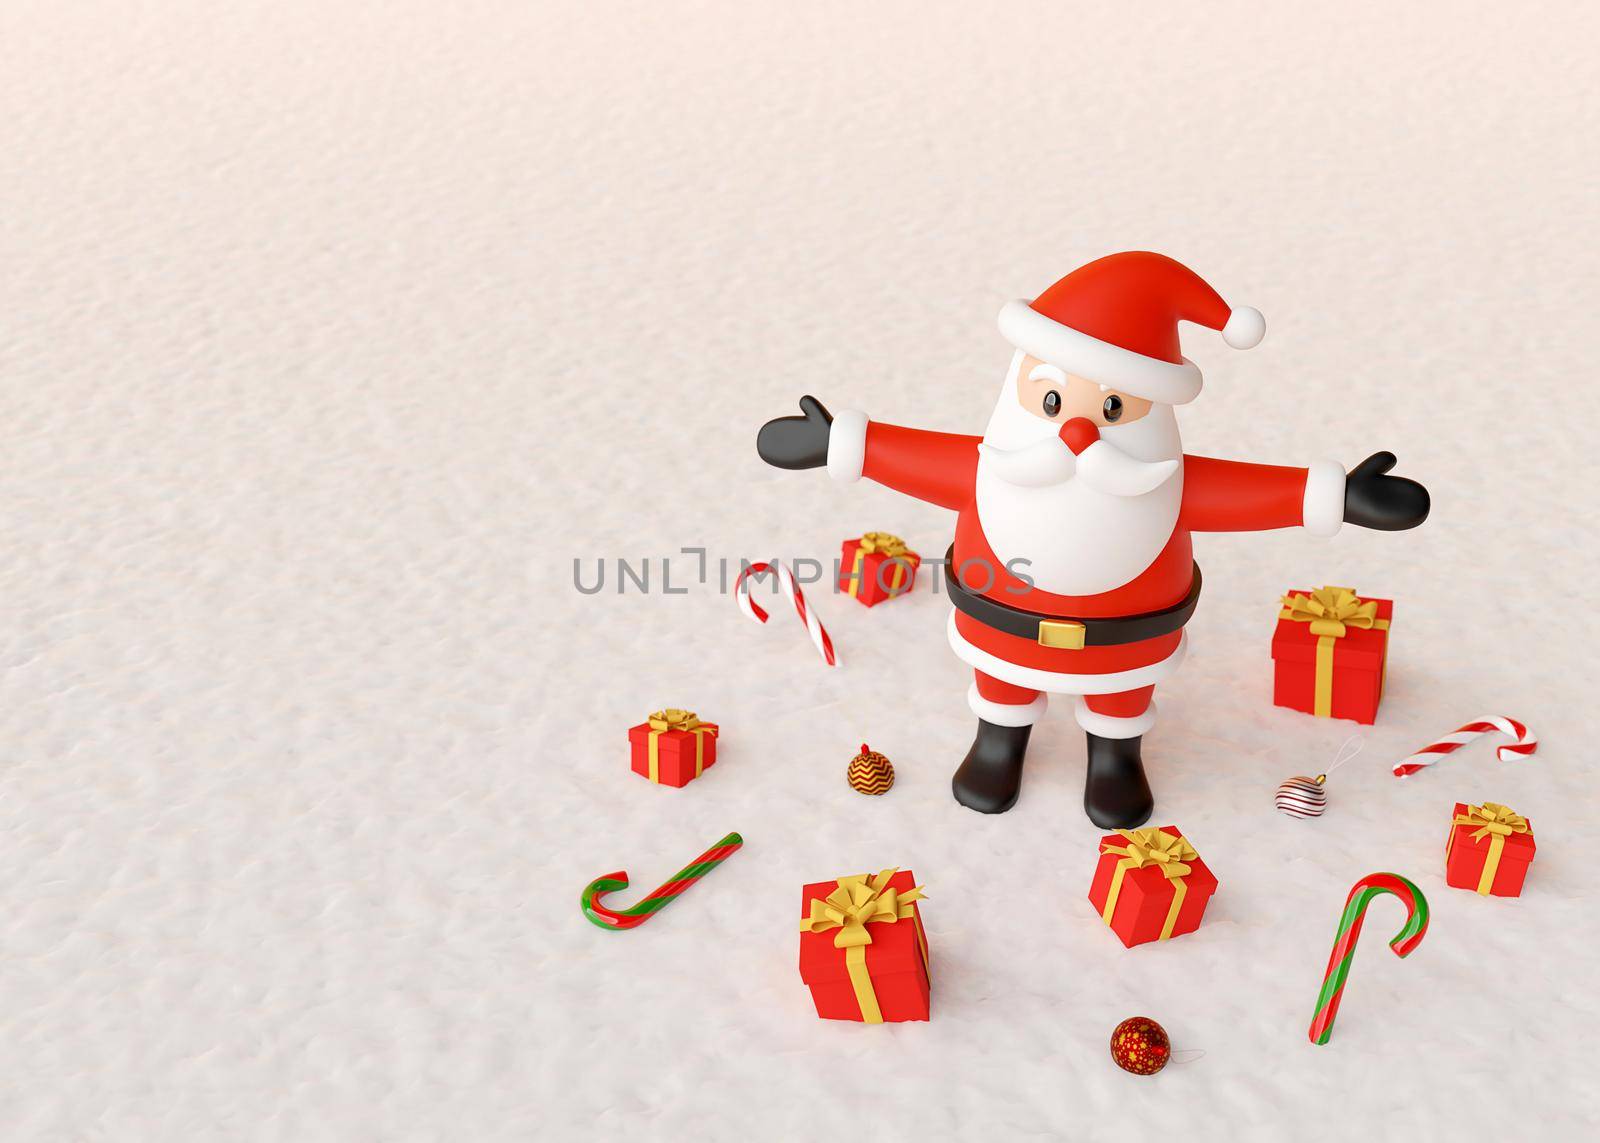 Merry Christmas, Santa Claus standing with gifts and Christmas ornaments on a snow ground, 3d rendering by nutzchotwarut